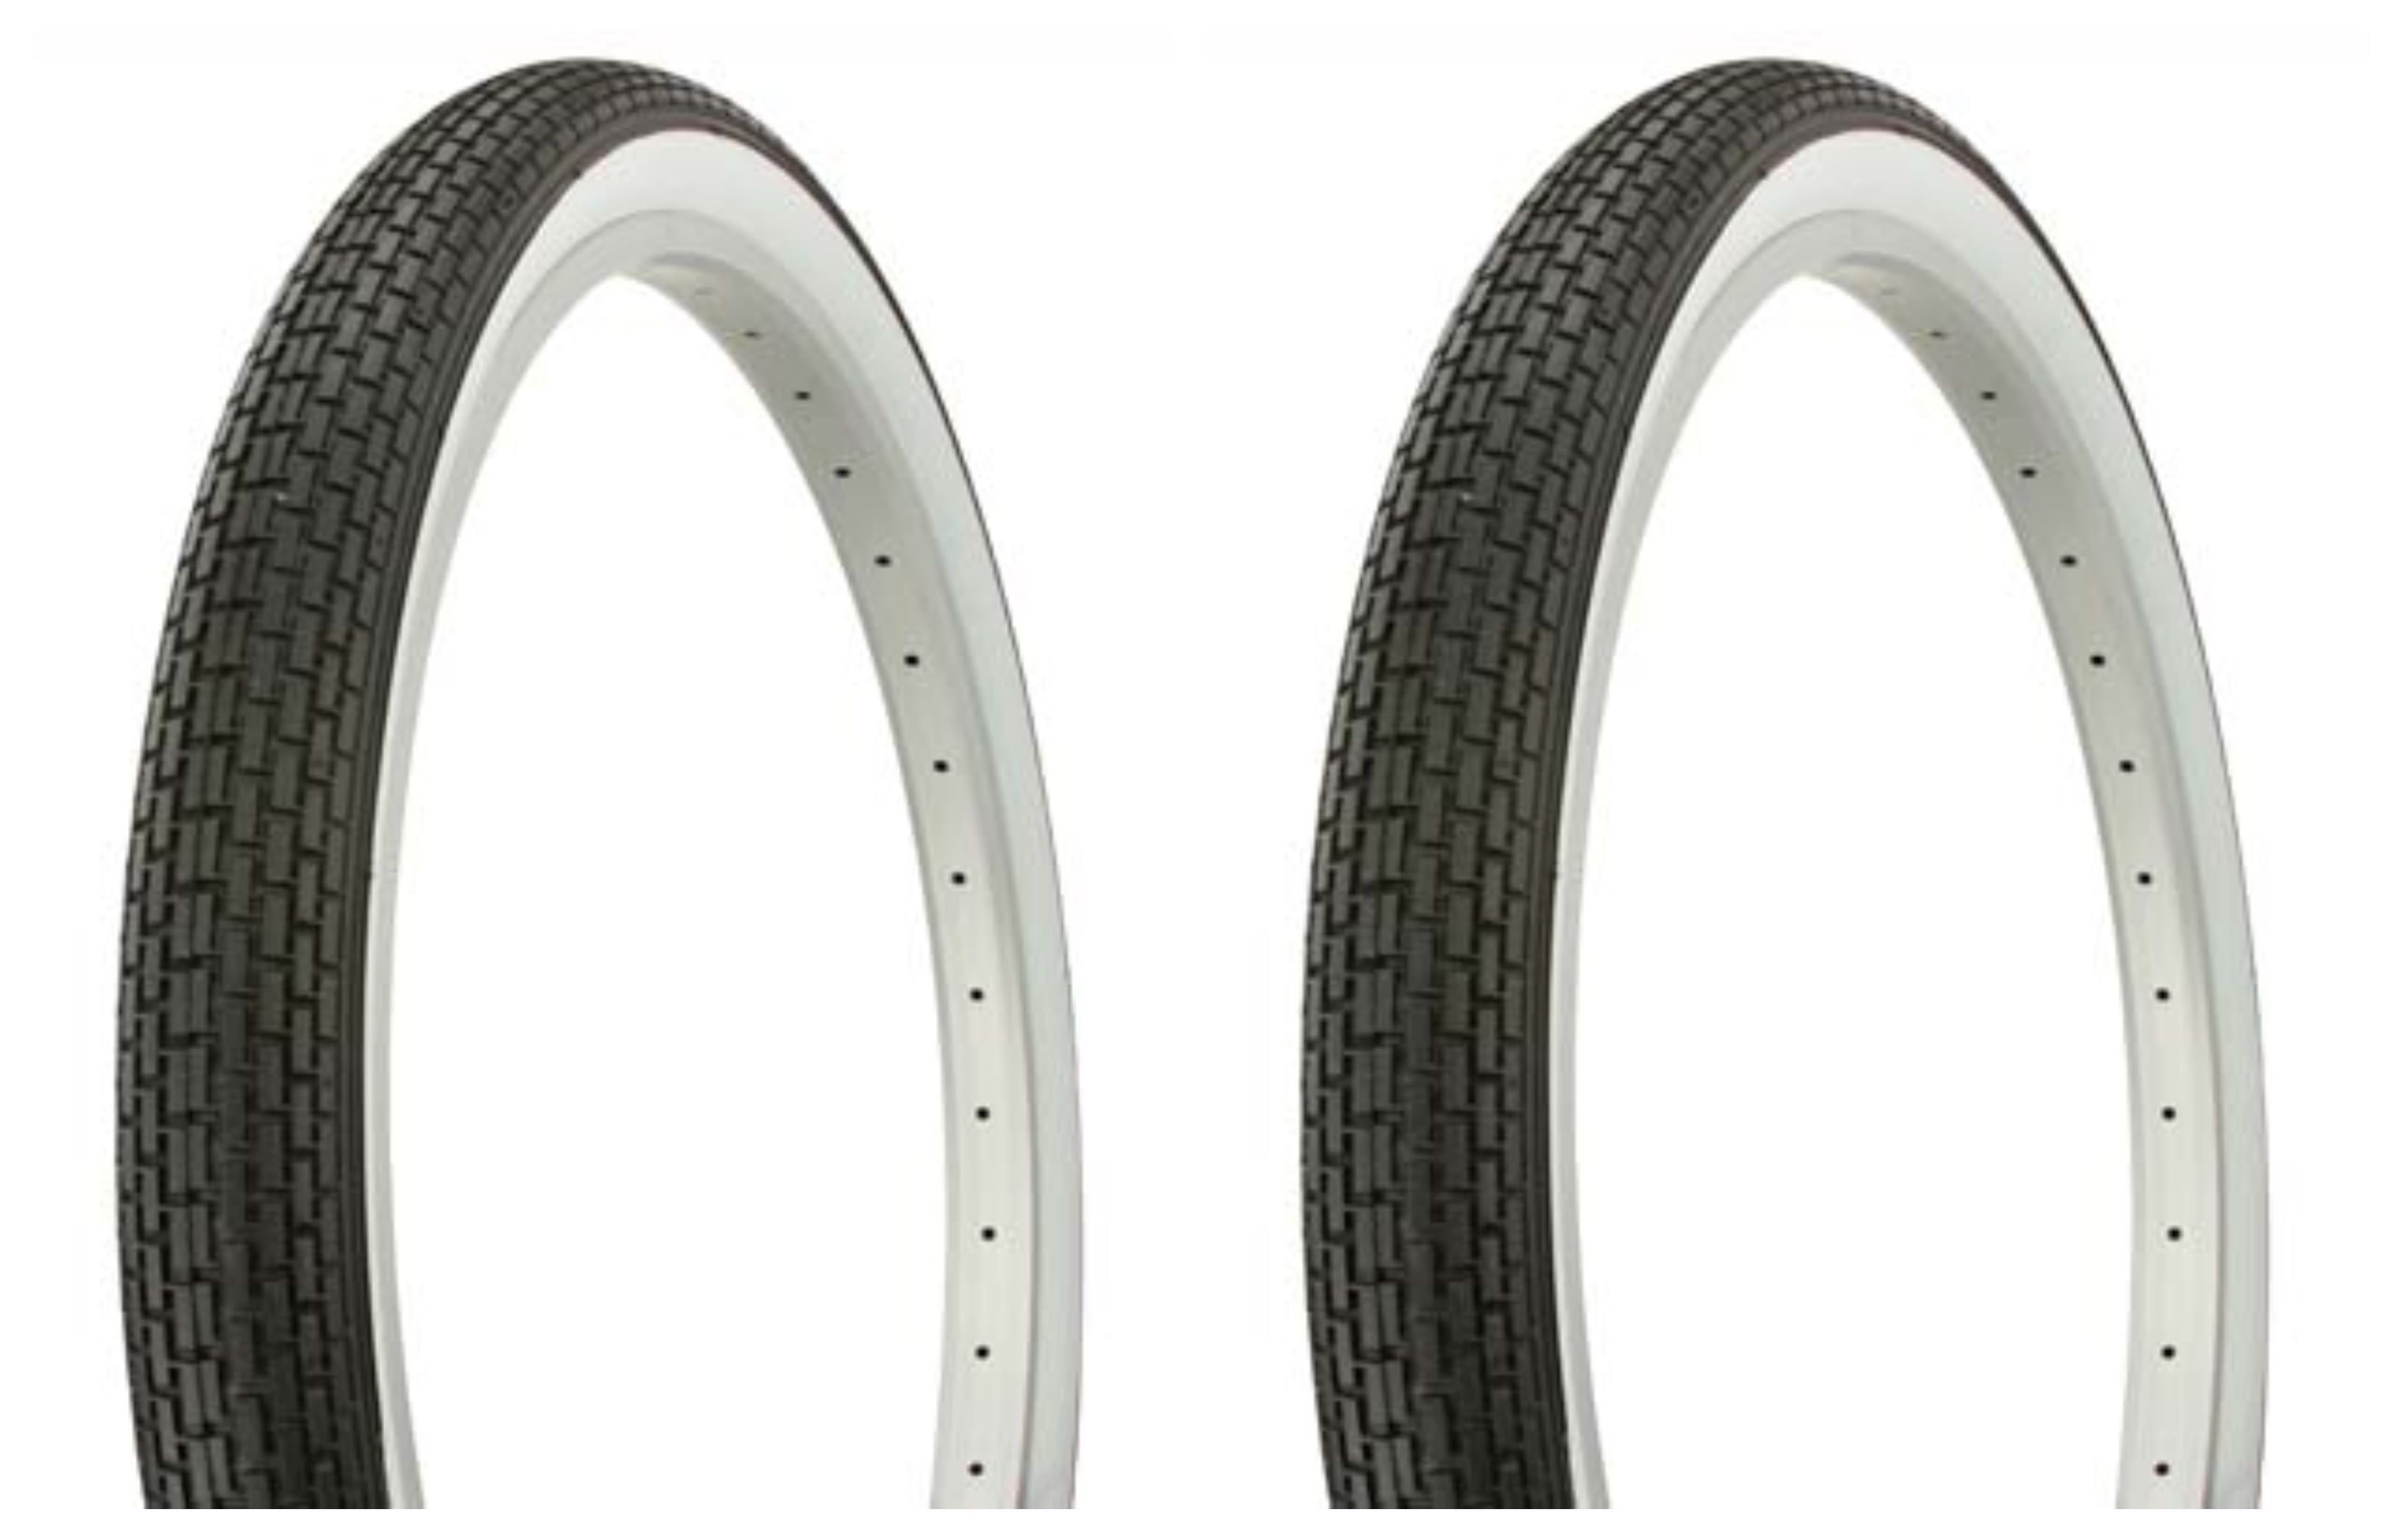 2 Duro 20" x 1.75" White Side Wall Bicycle Tires/Tubes/Rimstrip Cruiser Lowrider 